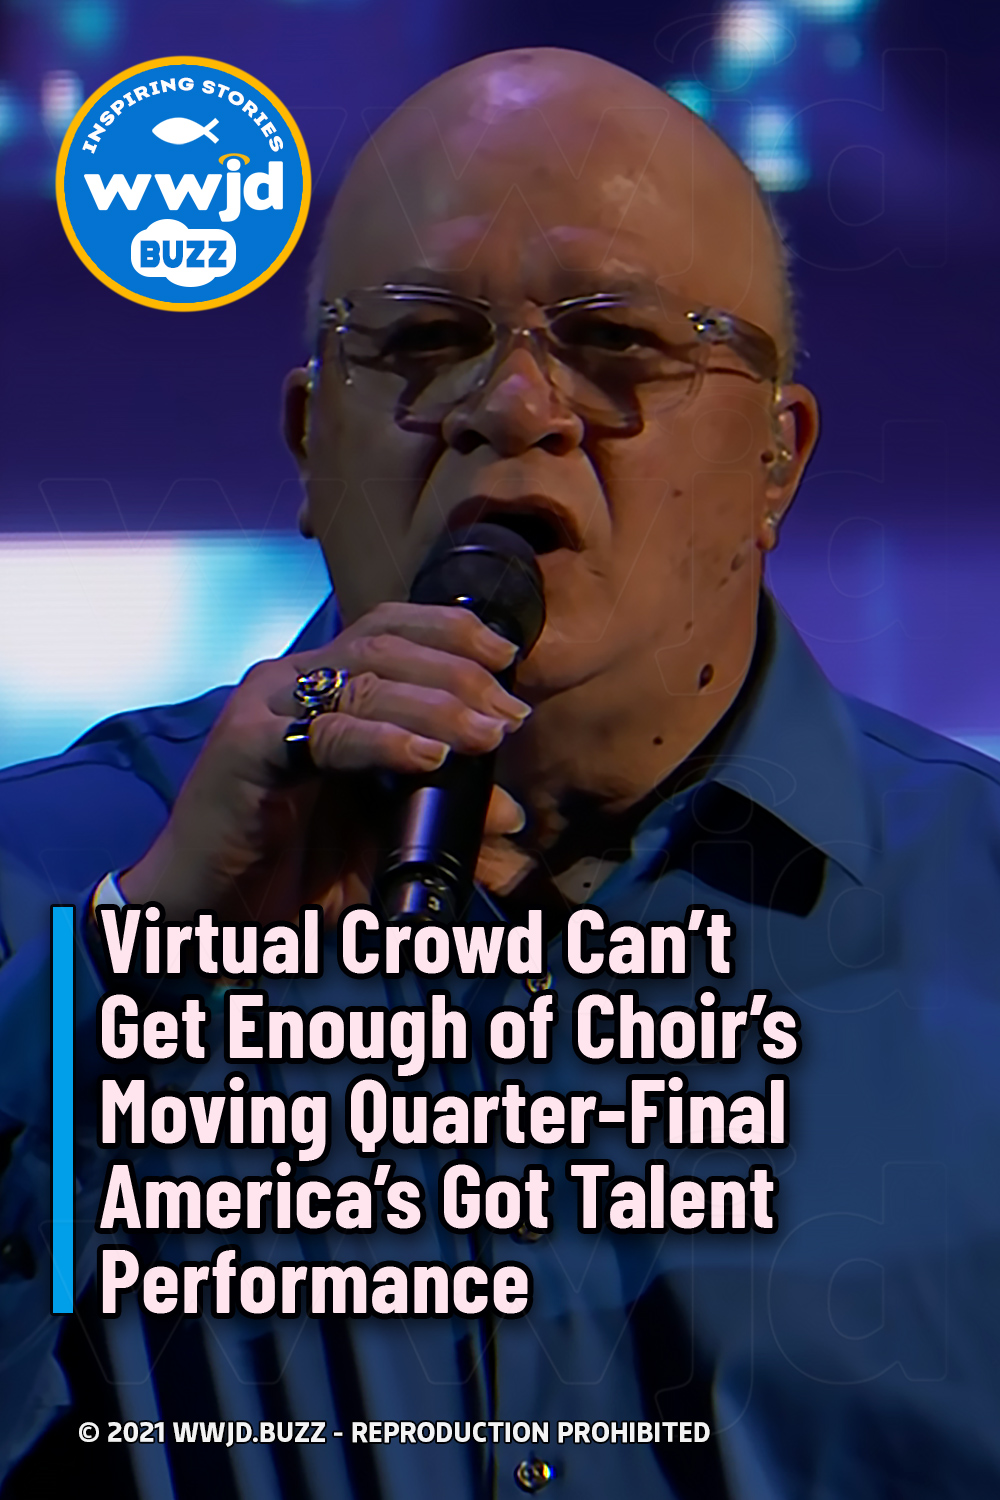 Virtual Crowd Can’t Get Enough of Choir’s Moving Quarter-Final America’s Got Talent Performance